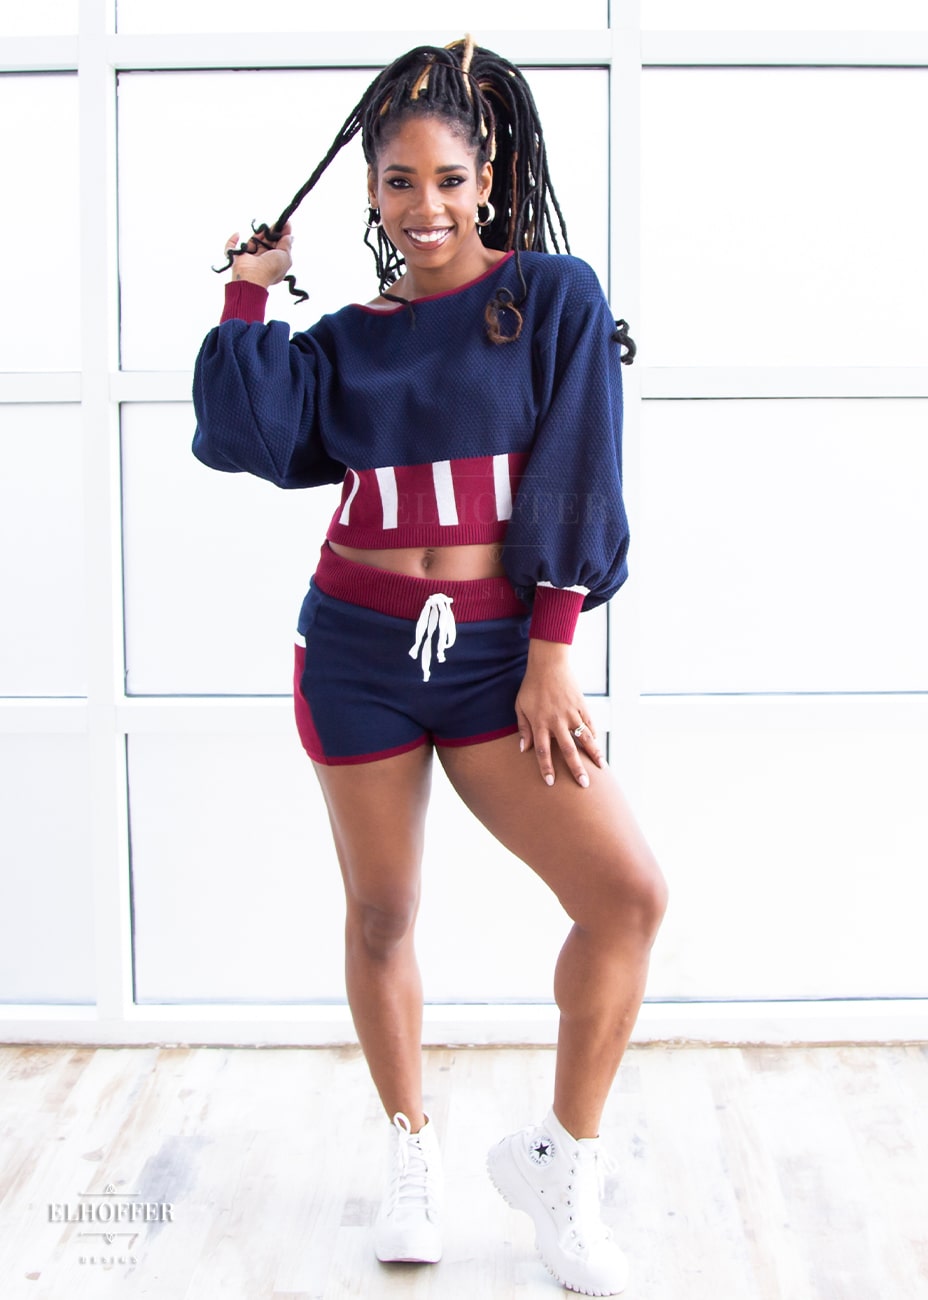 Krystina, a medium dark skinned S model with long braids in an updo, is smiling while wearing the red, white and blue knit oversized crop top with bishop sleeves. The sleeves and top of the crop are blue with a waffle knit, the waist is vertical red and white stripes. The cuffs are mainly red with a white detail. There is also a red detail at the neckline. She paired the sweater with a matching pair of blue and red knit shorts.